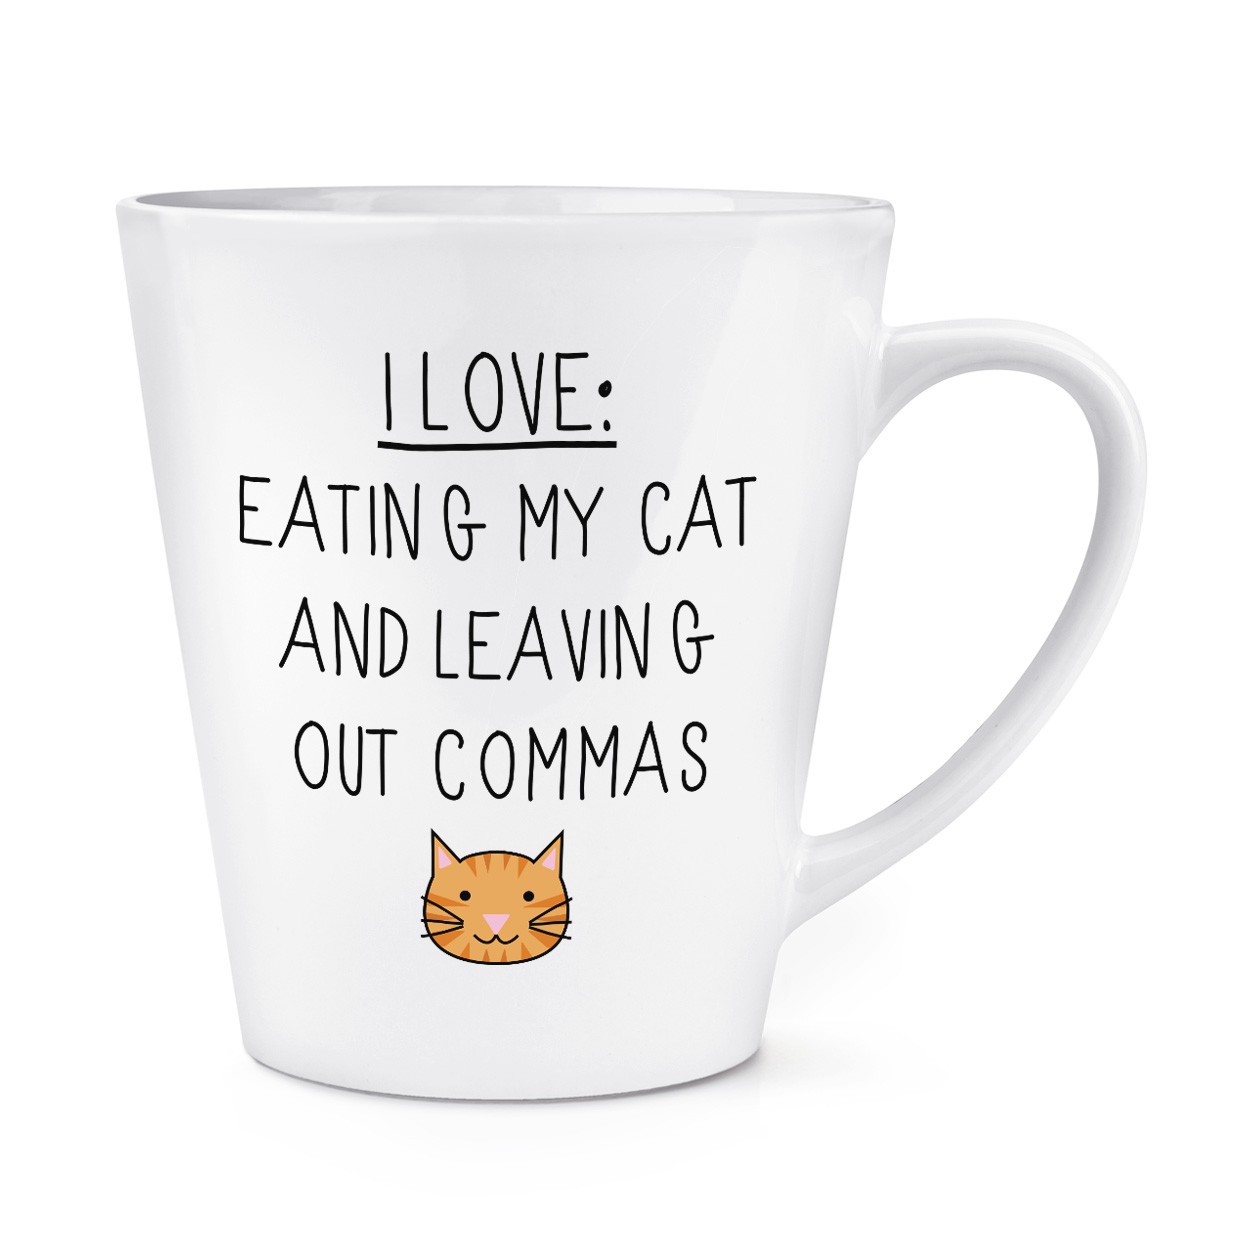 I Love Eating My Cat and Leaving Out Commas 12oz Latte Mug Cup